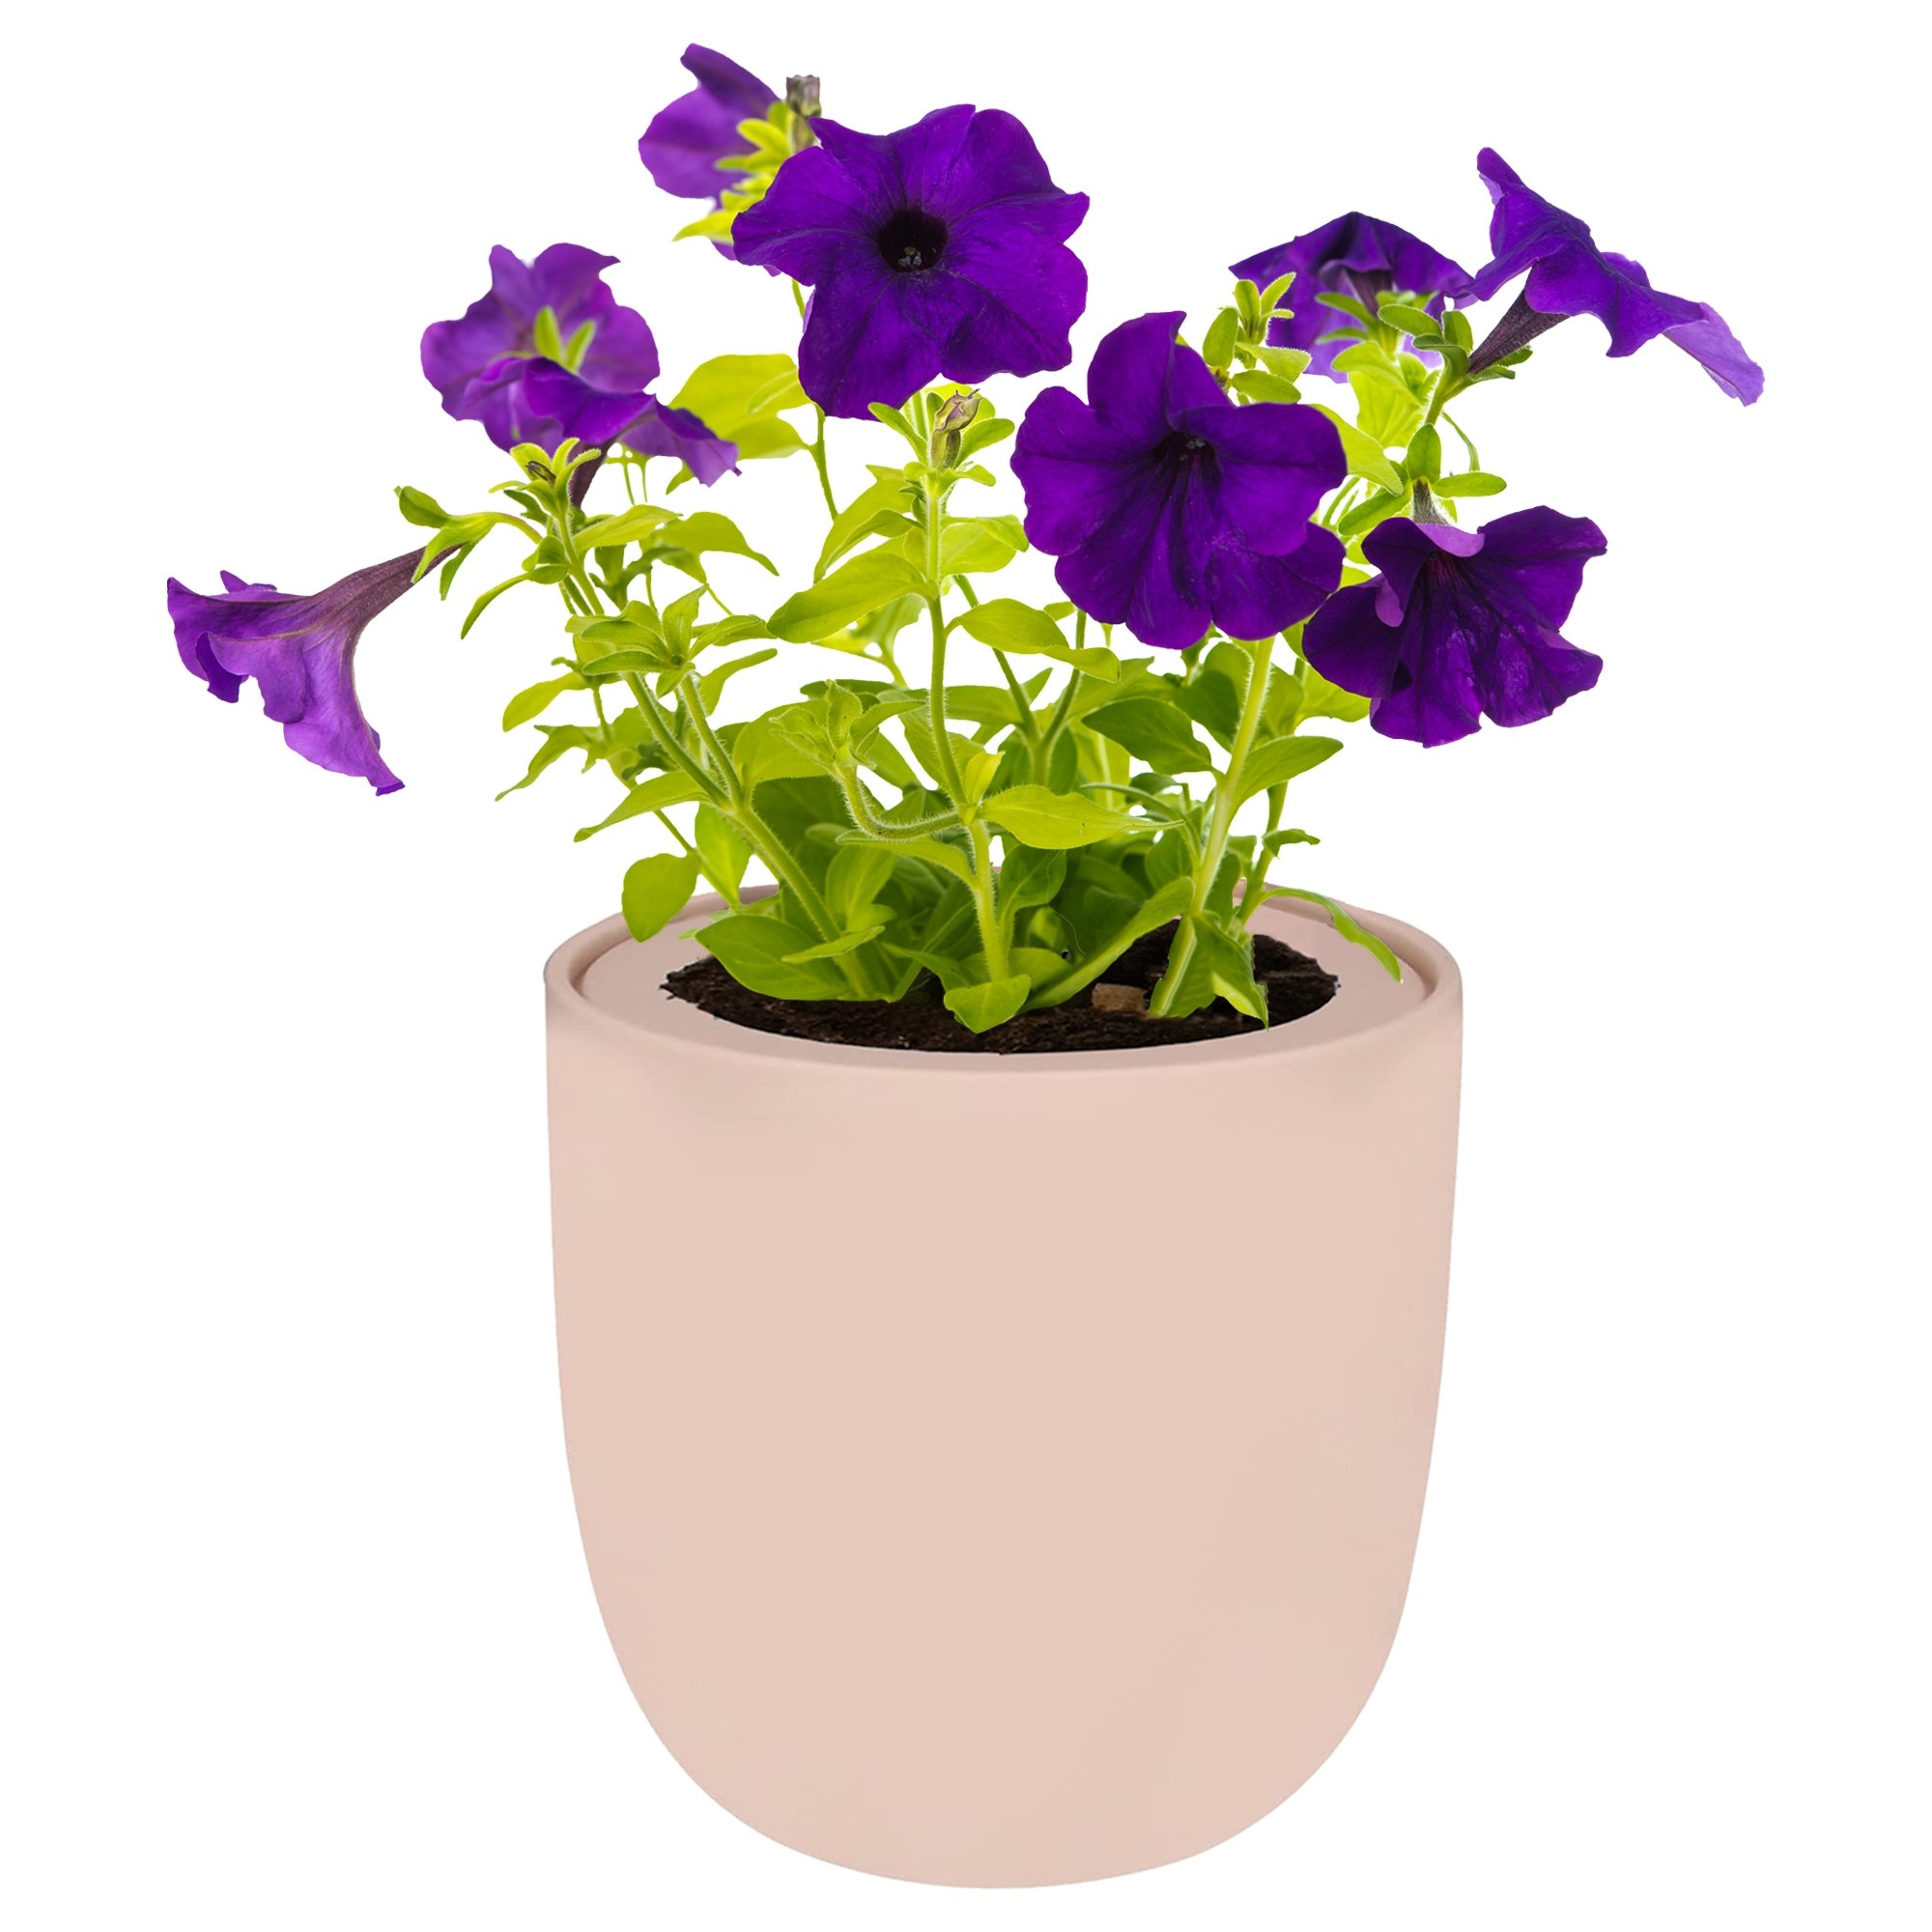 Hydroponic Growing Kit with Pink Ceramic Pot and Seeds (P-Viola (Johnny Jump Up)